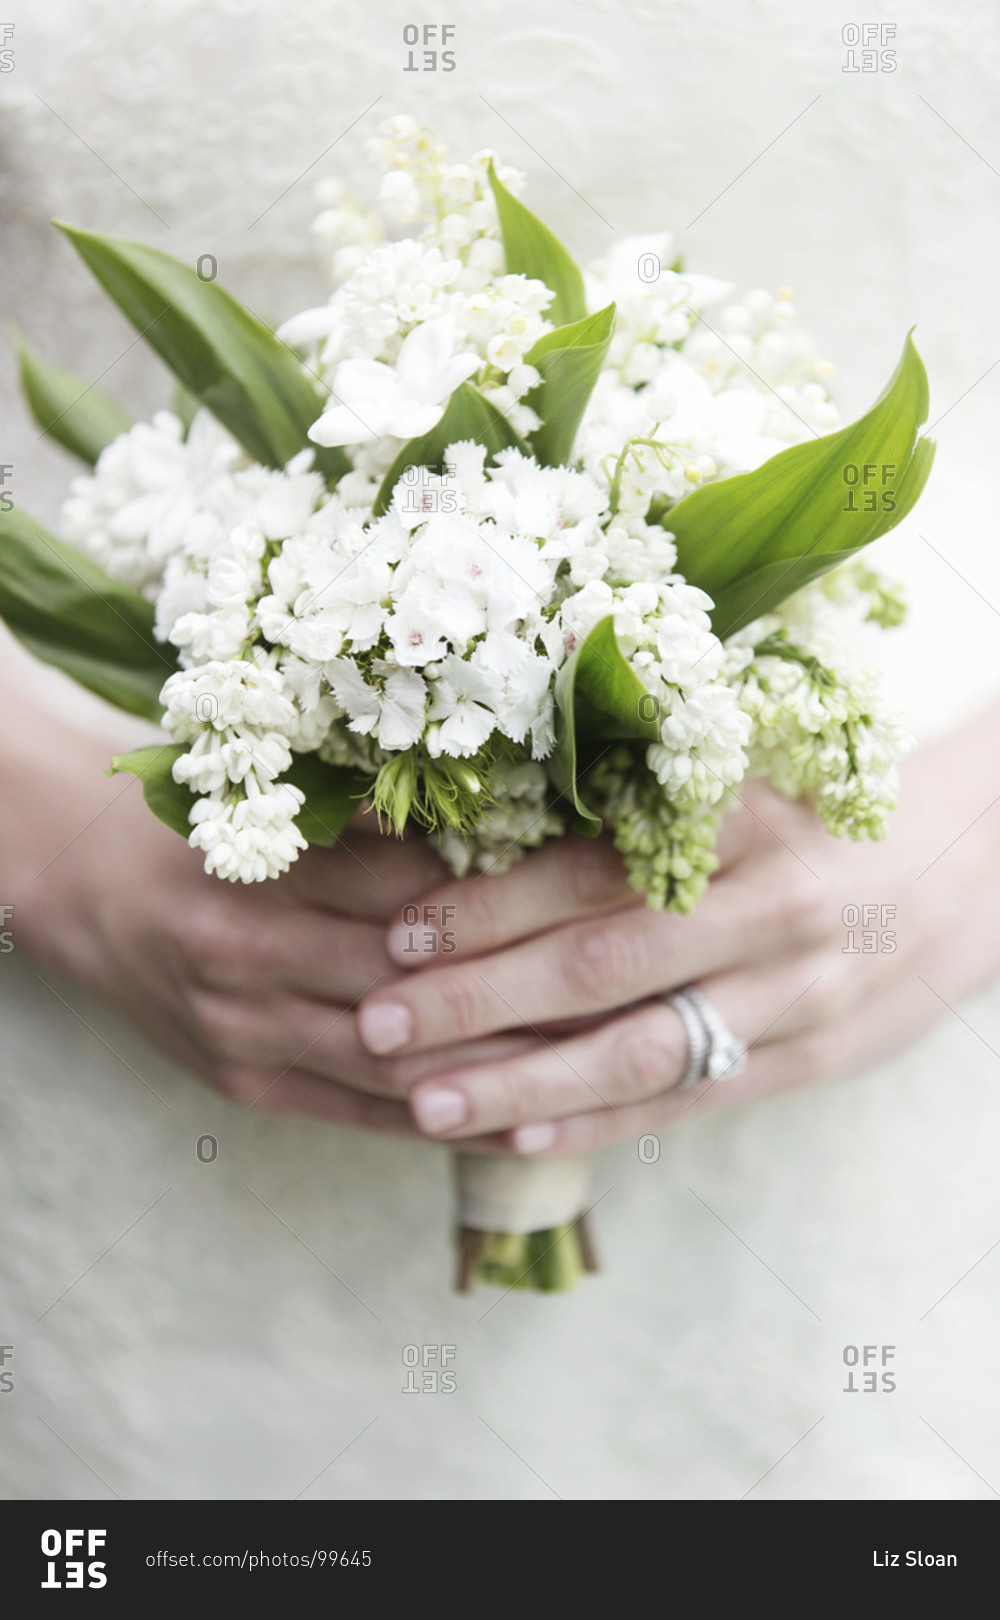 Mid section view of bride holding small bridal bouquet